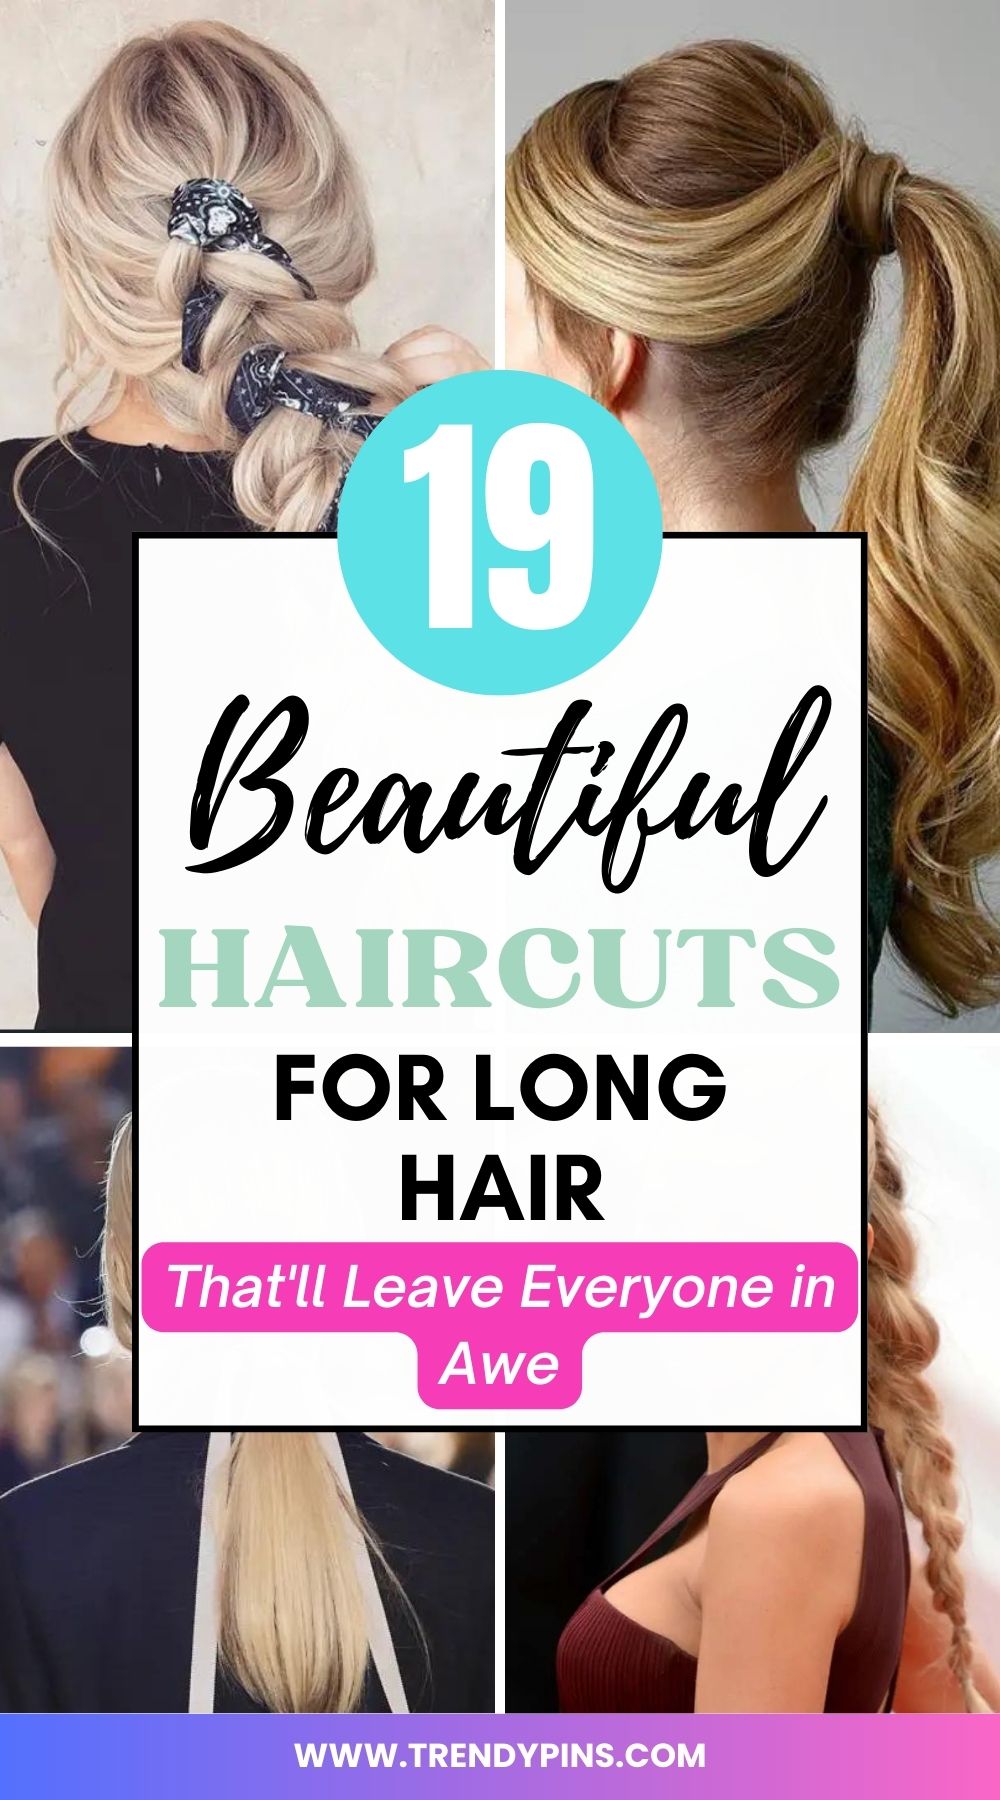 Elevate your long hair with these 19 beautiful hairstyles that inspire elegance and creativity. From classic updos to flowing waves, discover a range of stunning options to complement your long locks with style.